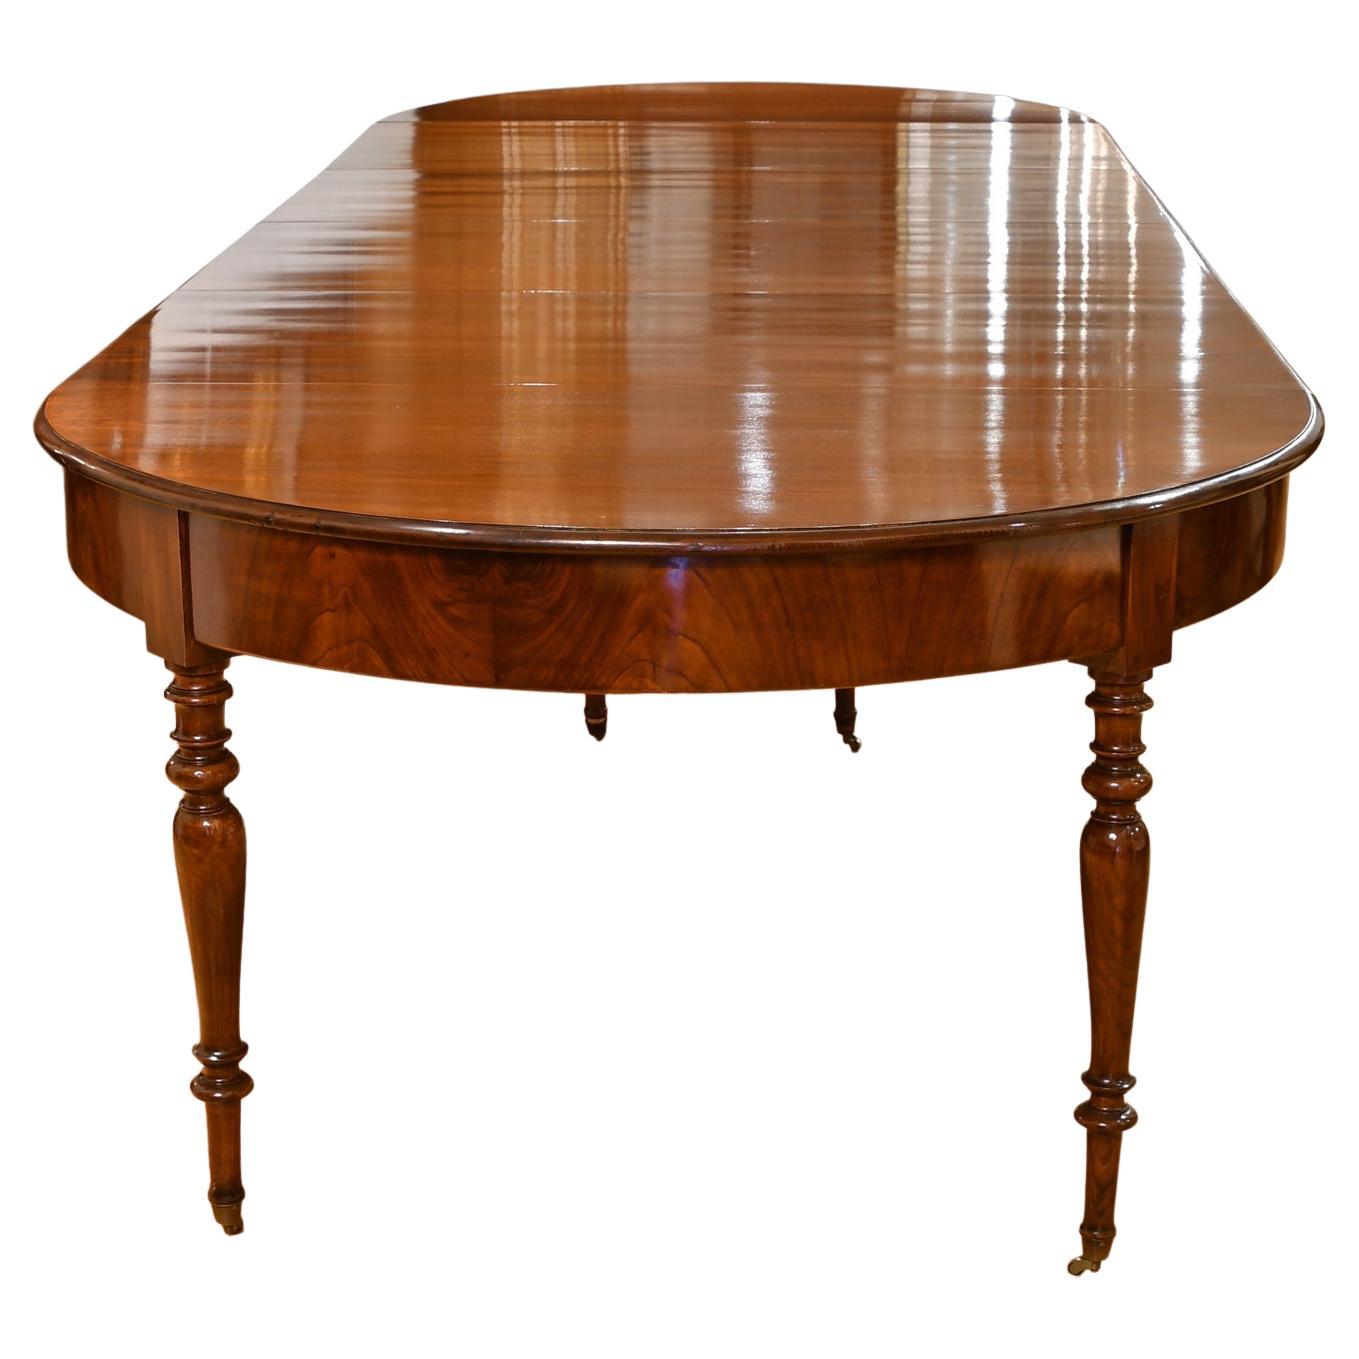 Mid-19th Century Antique 12 Foot Extension Dining Table in Mahogany w Racetrack Top & Four Leaves